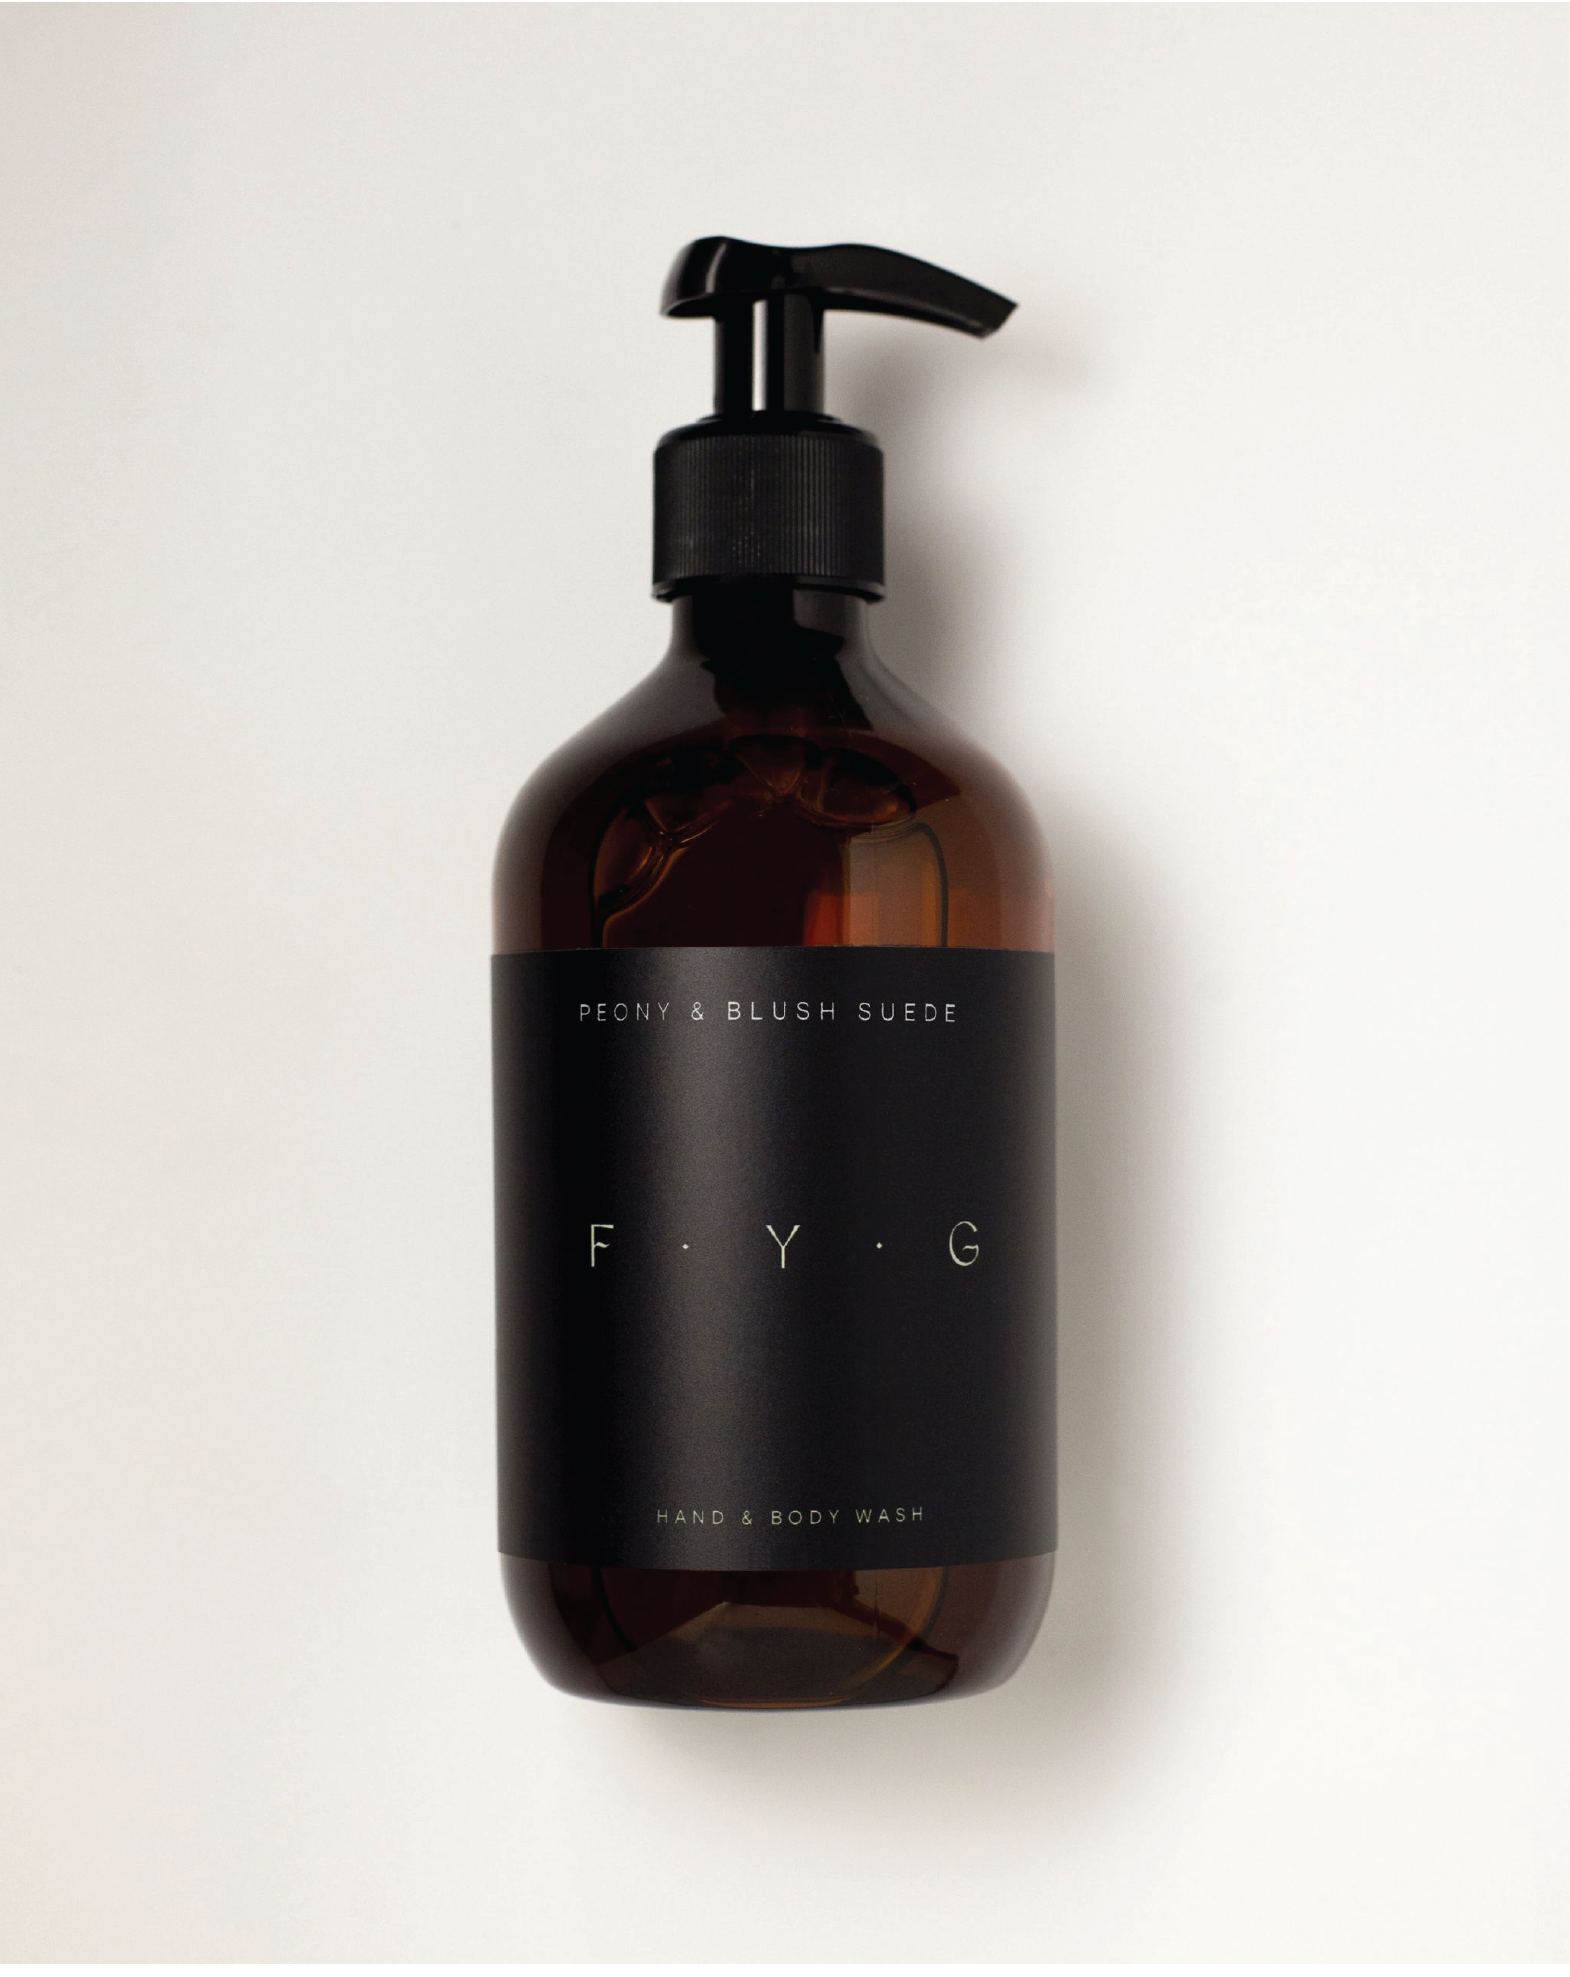 Find Your Glow Peony & Blush Suede Hand & Body Wash